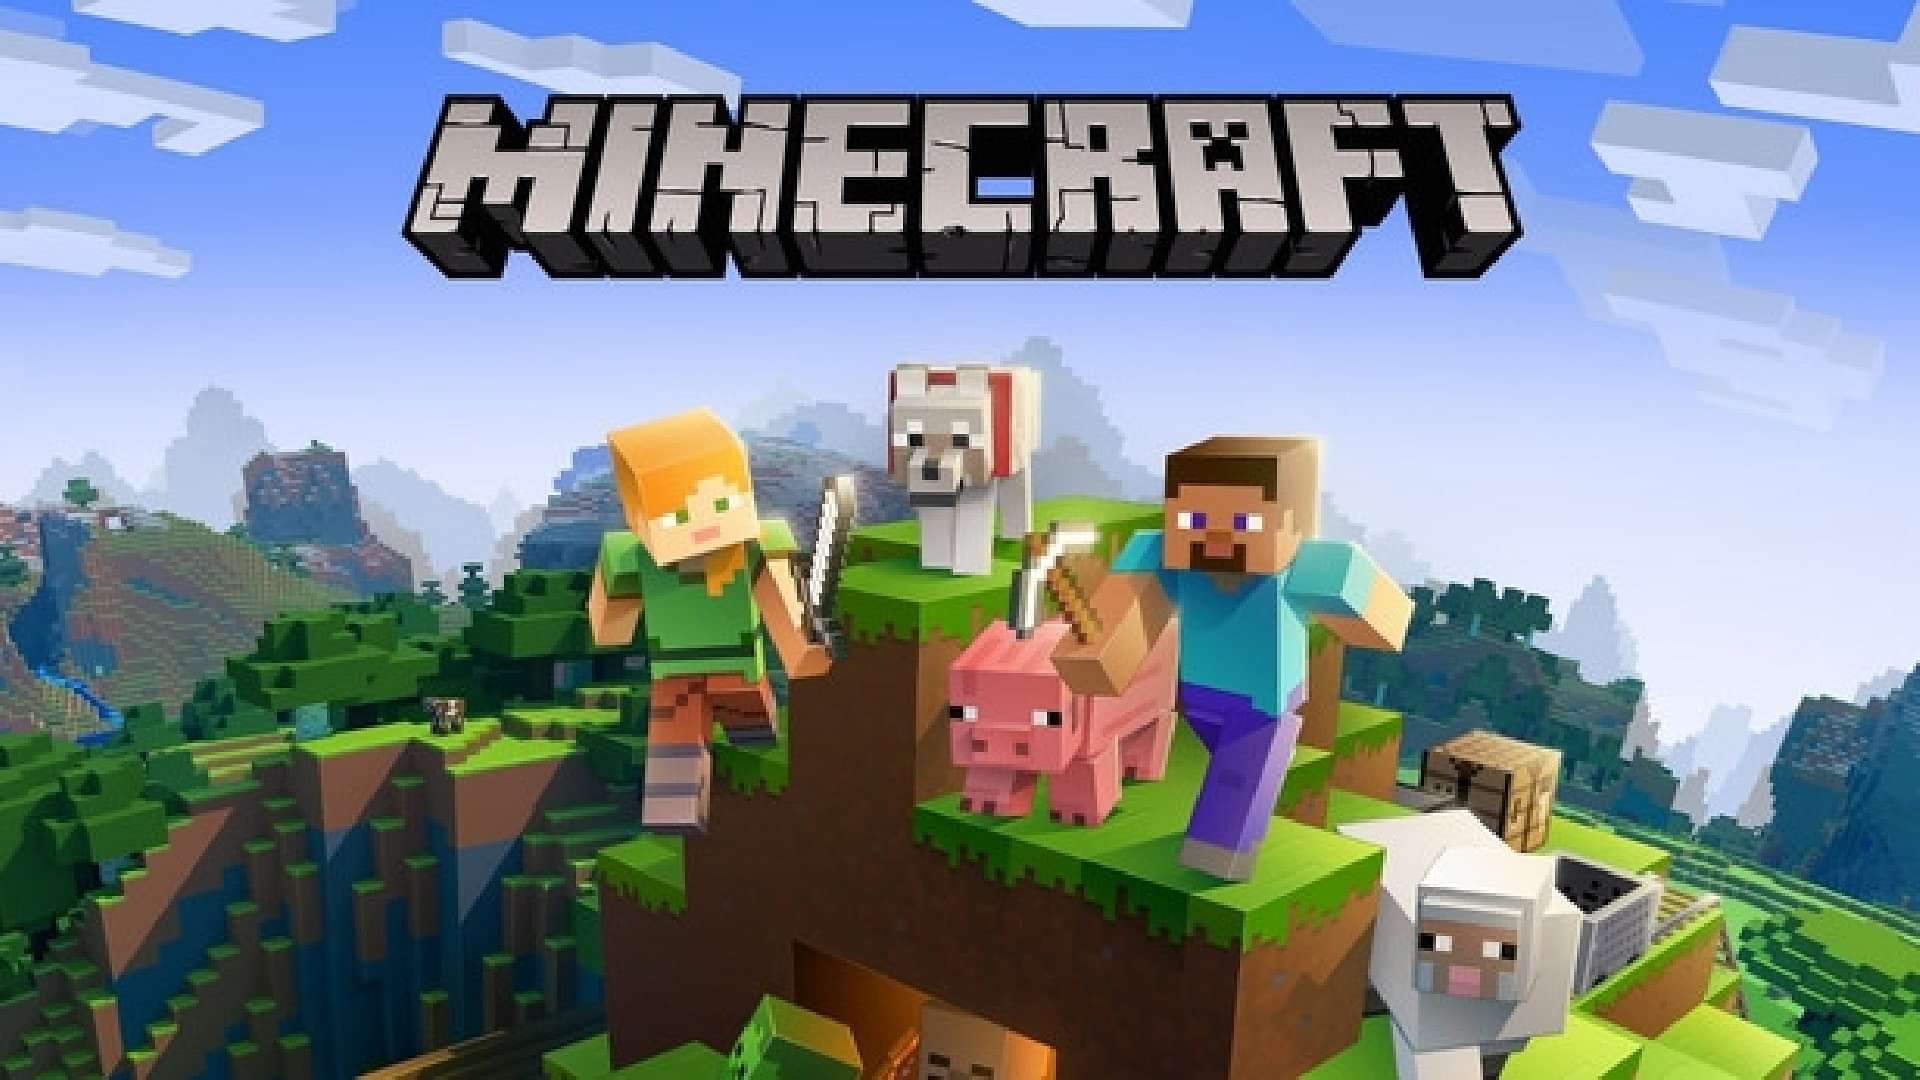 5 Best Minecraft Servers for Playing Minigames 2023